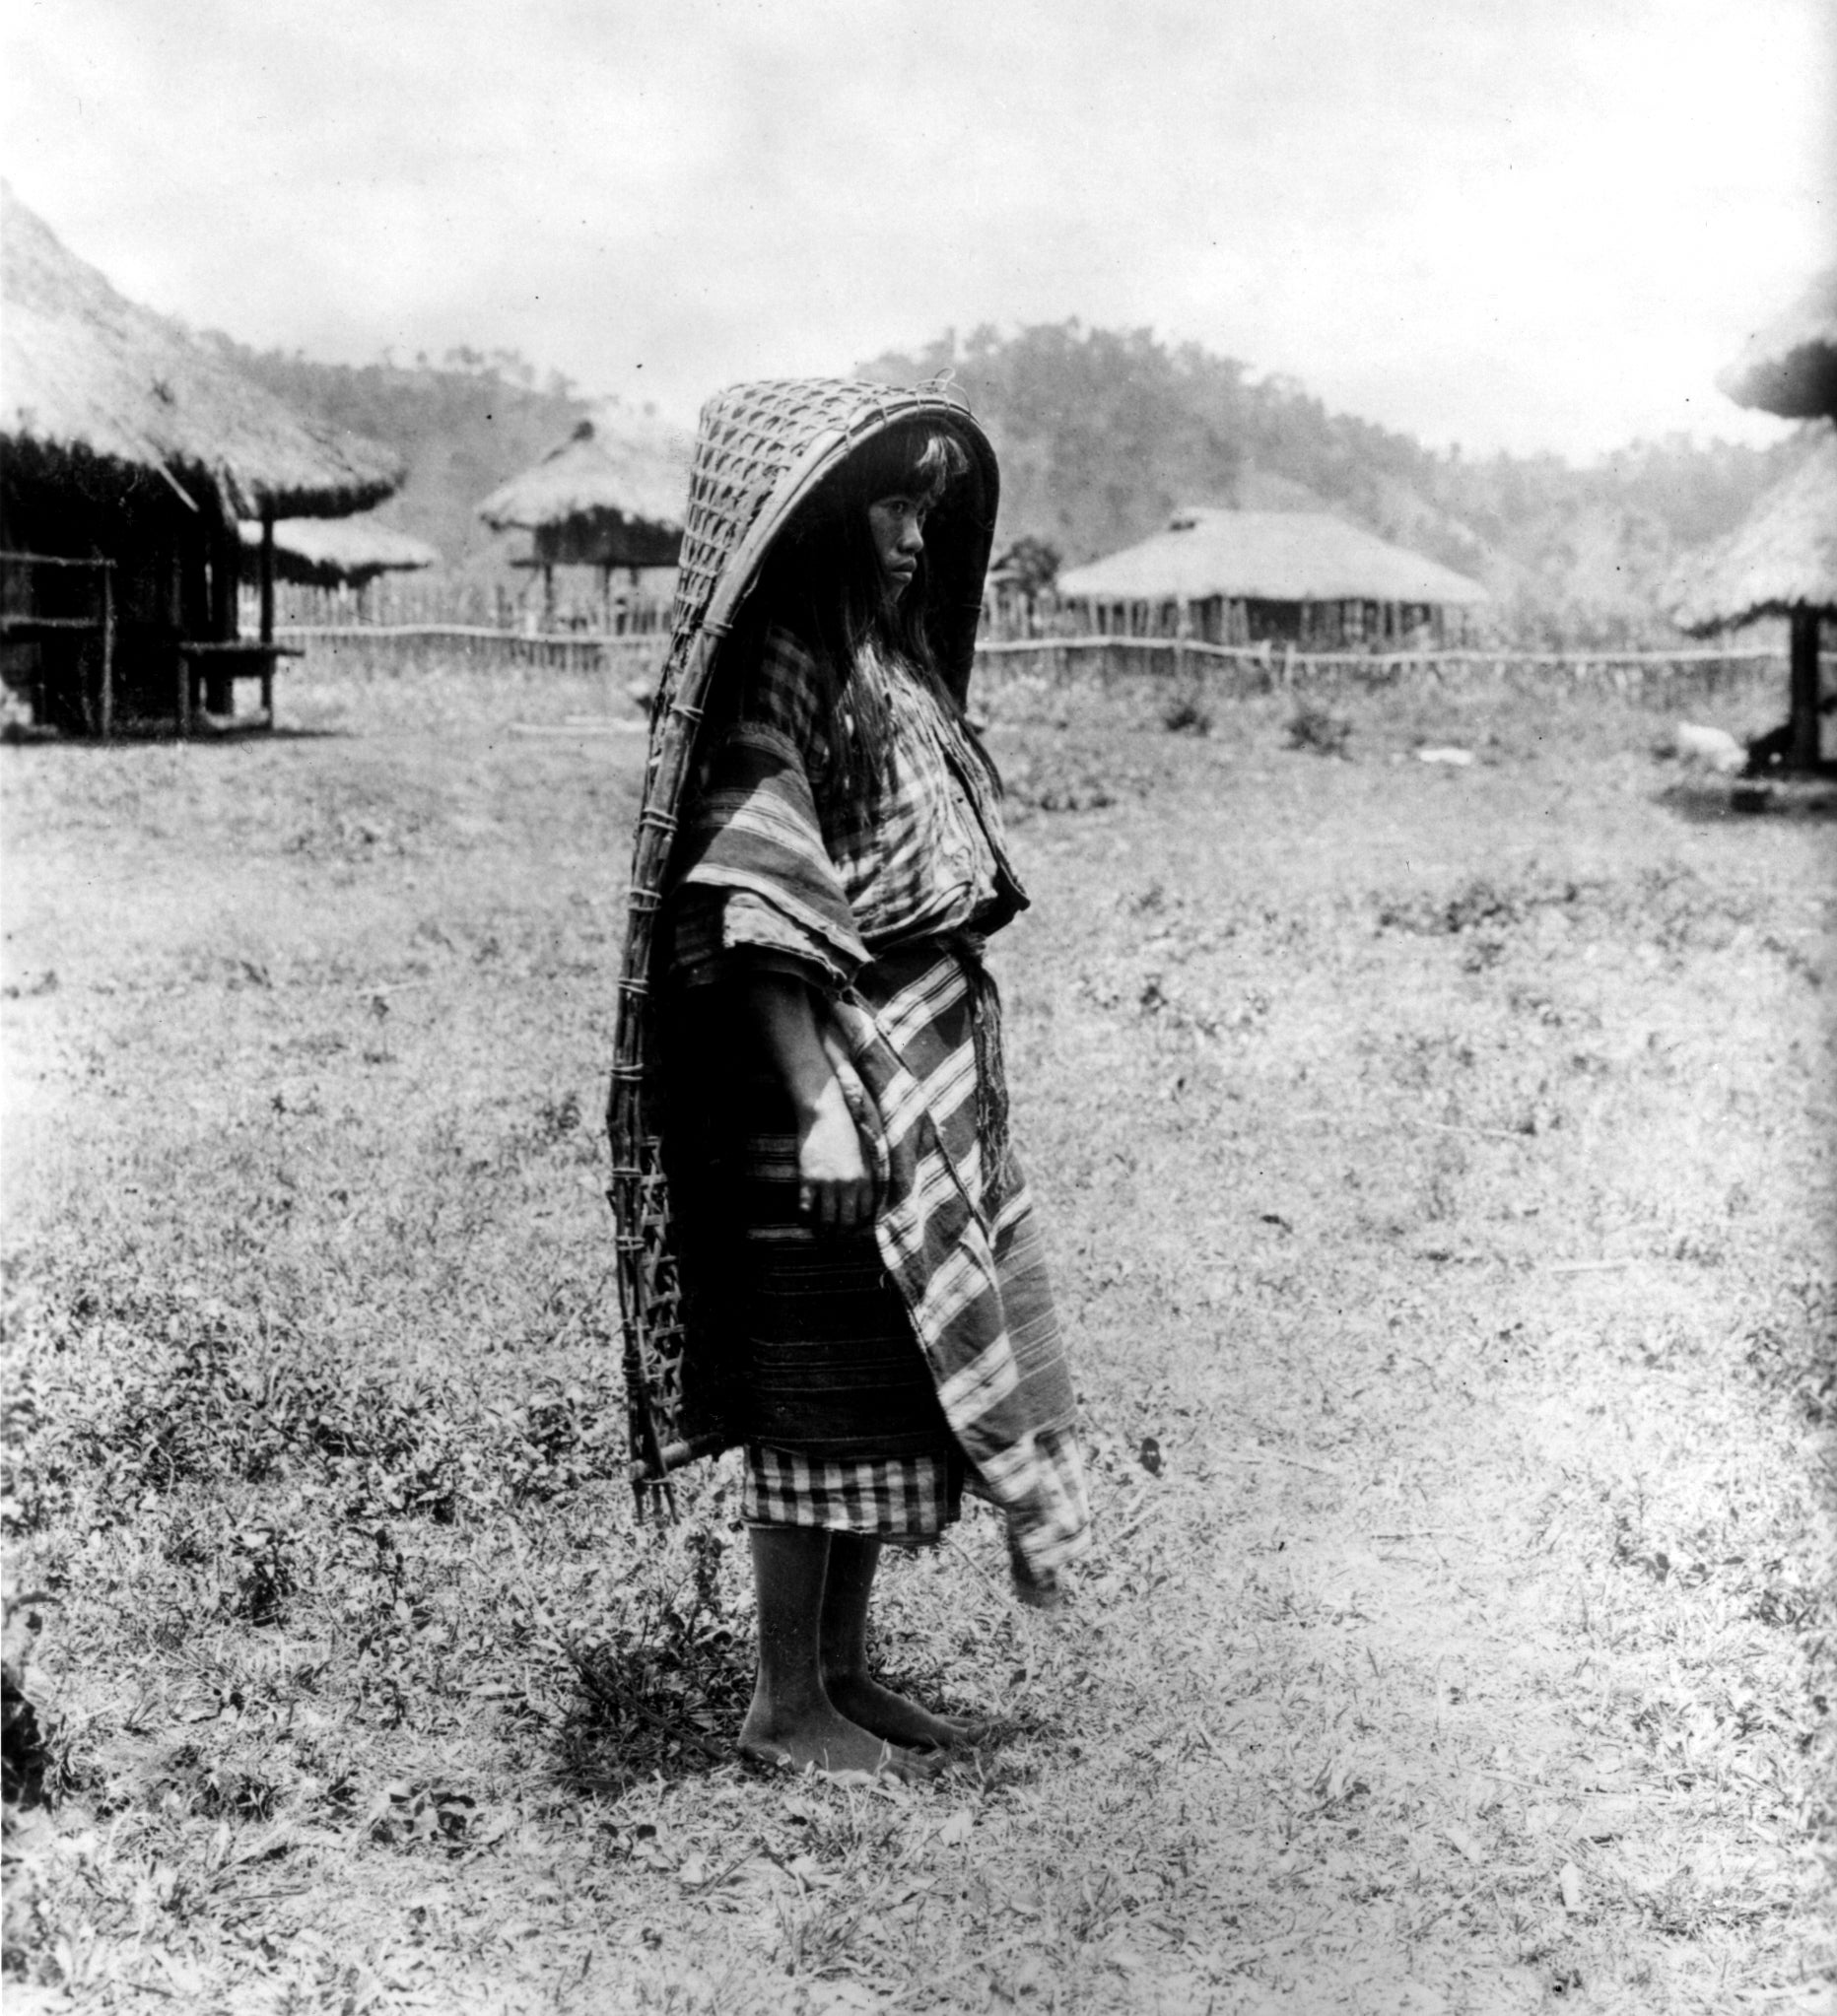 An Ibaloi woman models the way in which a carrying basket can be used as a rain cape early 1900s; Fowler Museum at UCLA, Day Collection; R2013.0801.061